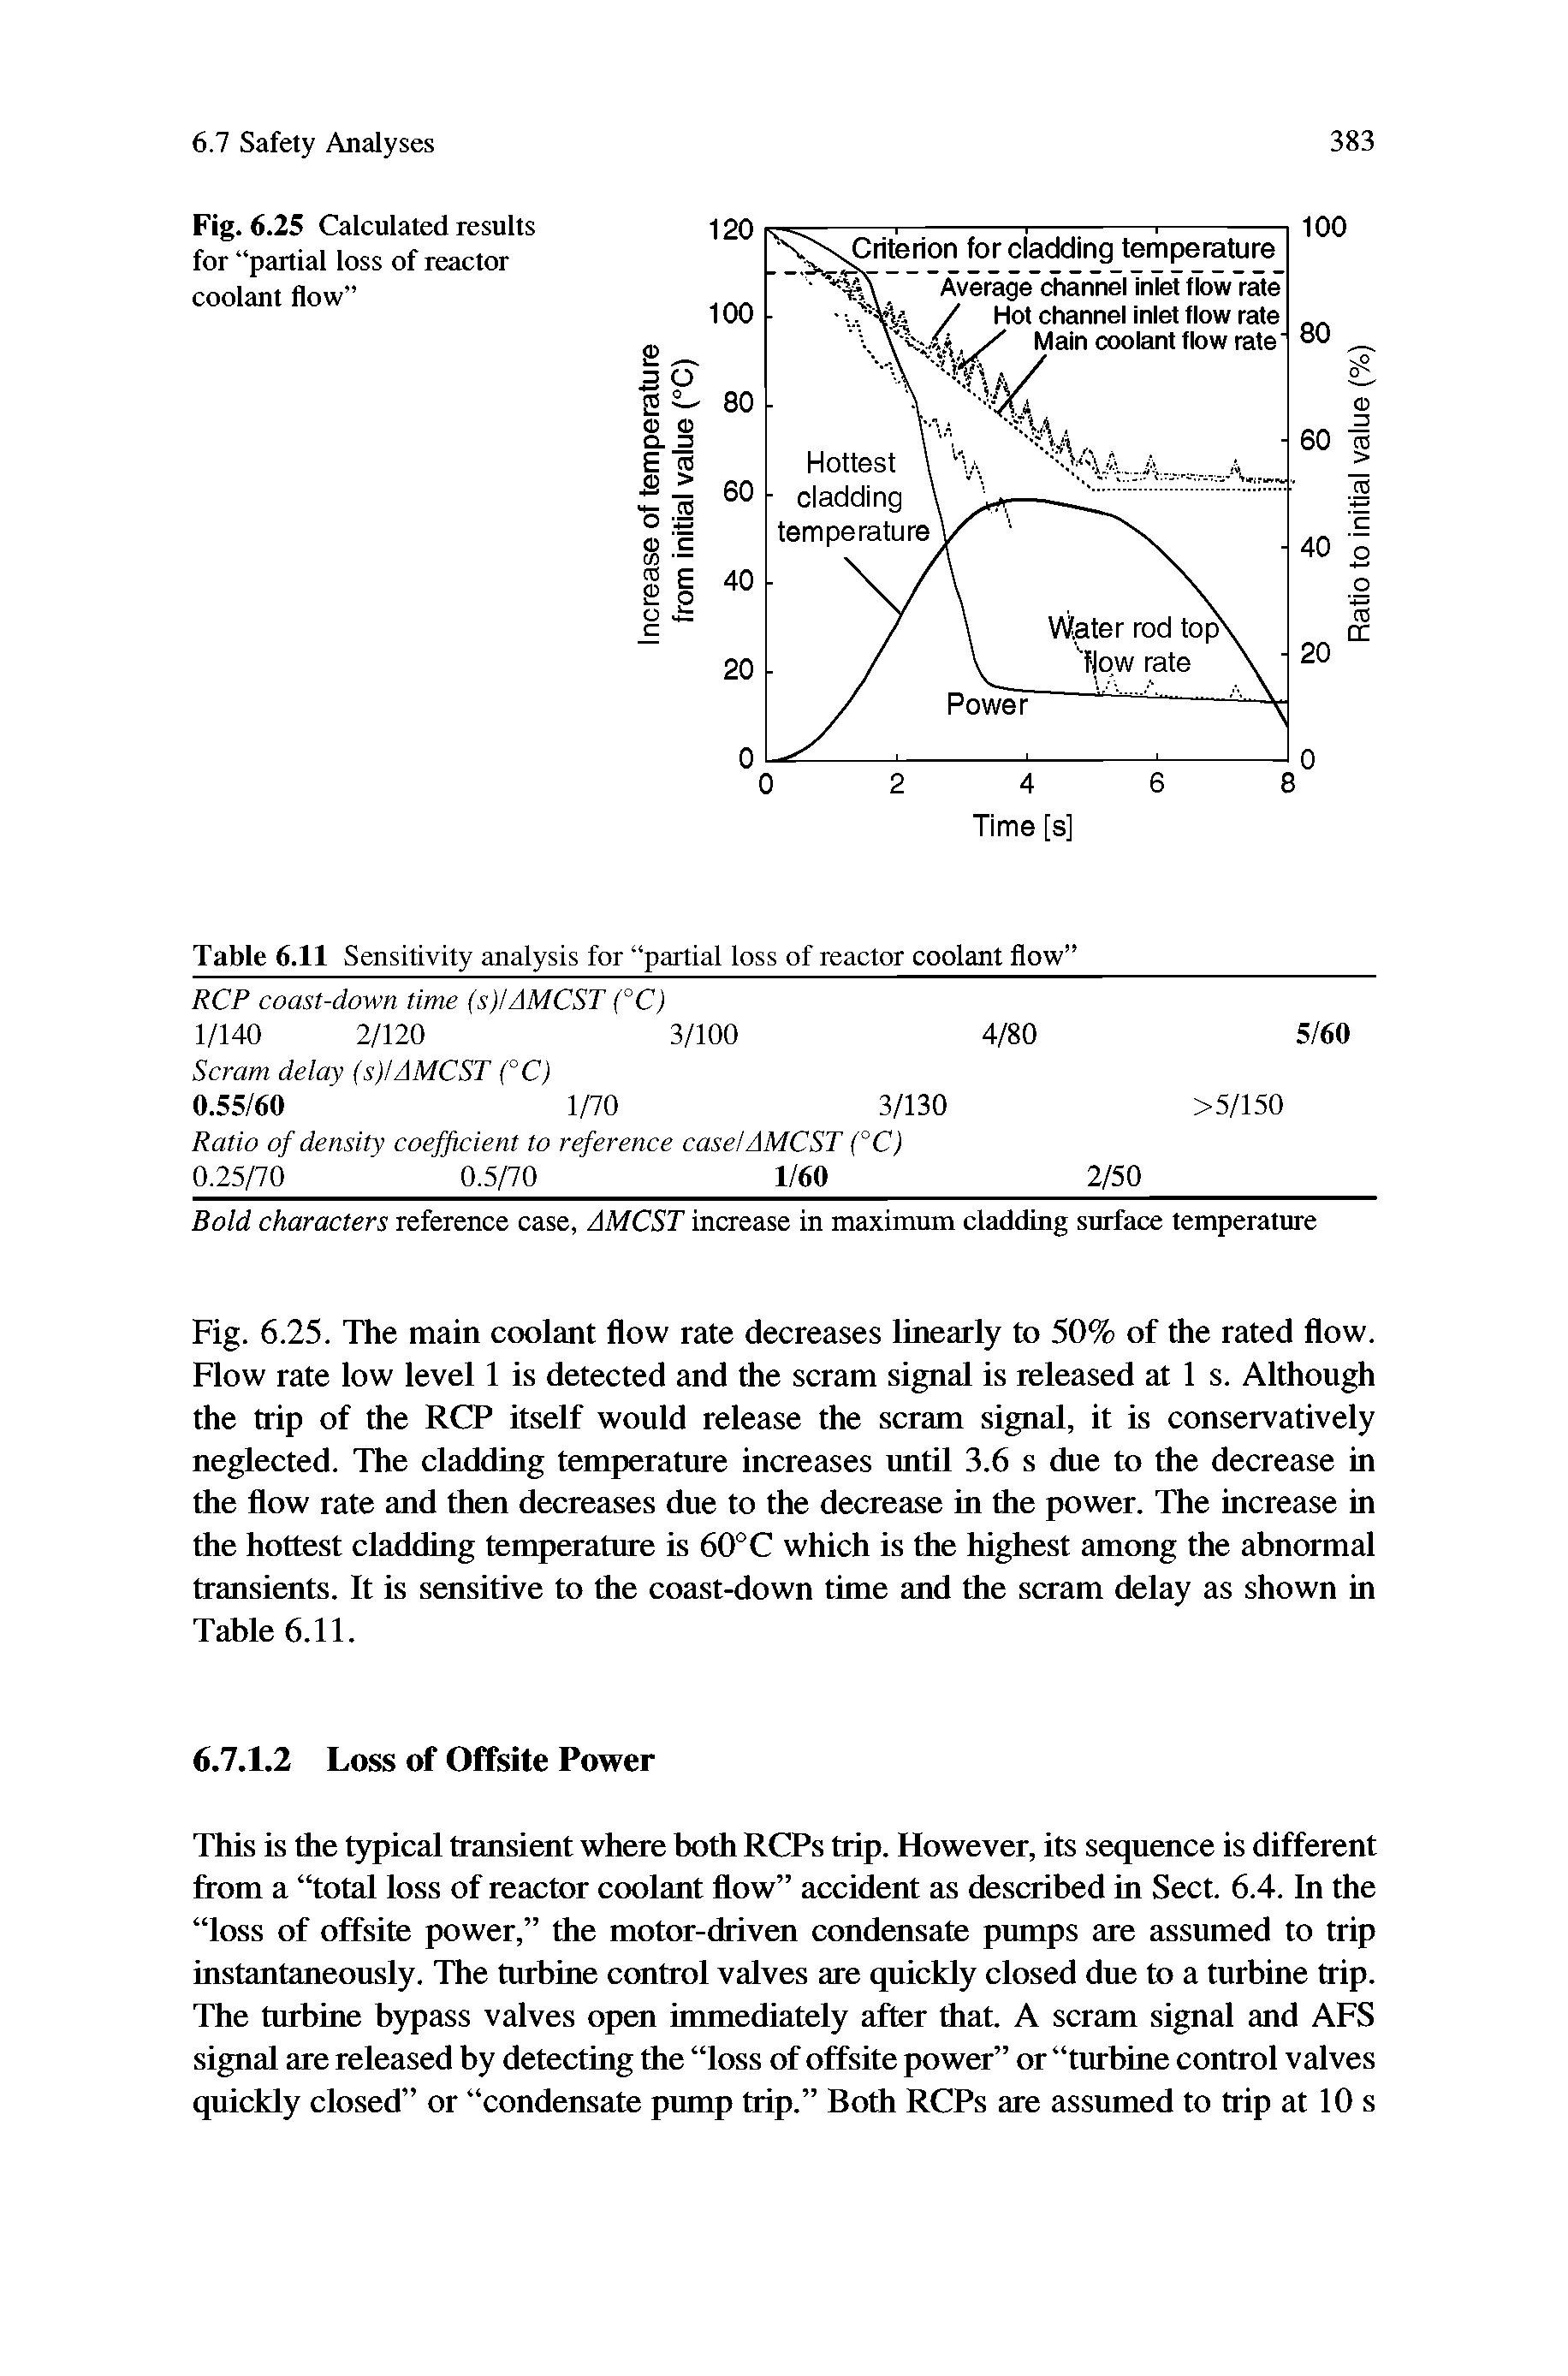 Fig. 6.25. The main coolant flow rate decreases linearly to 50% of the rated flow. Flow rate low level 1 is detected and the scram signal is released at 1 s. Although the trip of the RCP itself would release the scram signal, it is conservatively neglected. The cladding temperature increases until 3.6 s due to the decrease in the flow rate and then decreases due to the decrease in the power. The increase in the hottest cladding temperature is 60°C which is the highest among the abnormal transients. It is sensitive to the coast-down time and the scram delay as shown in Table 6.11.